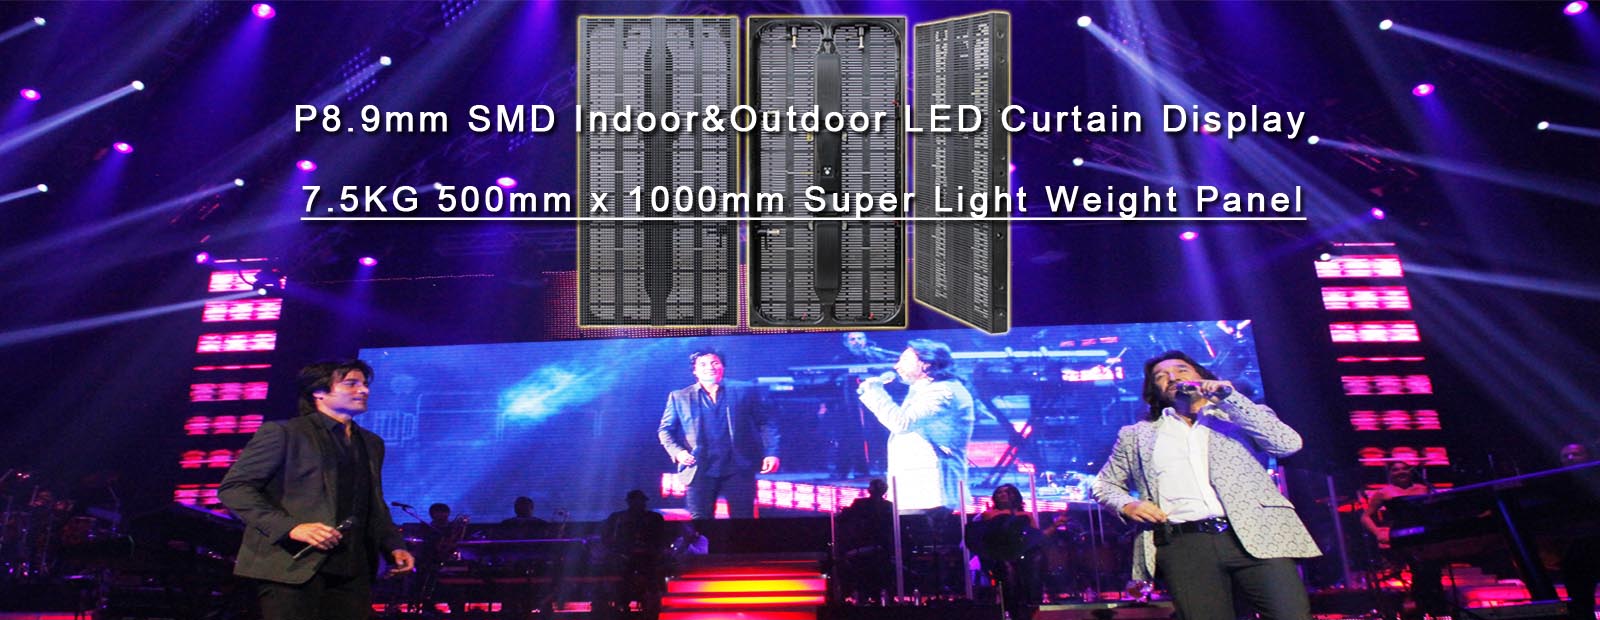 P8.9 Outdoor LED Curtain Display